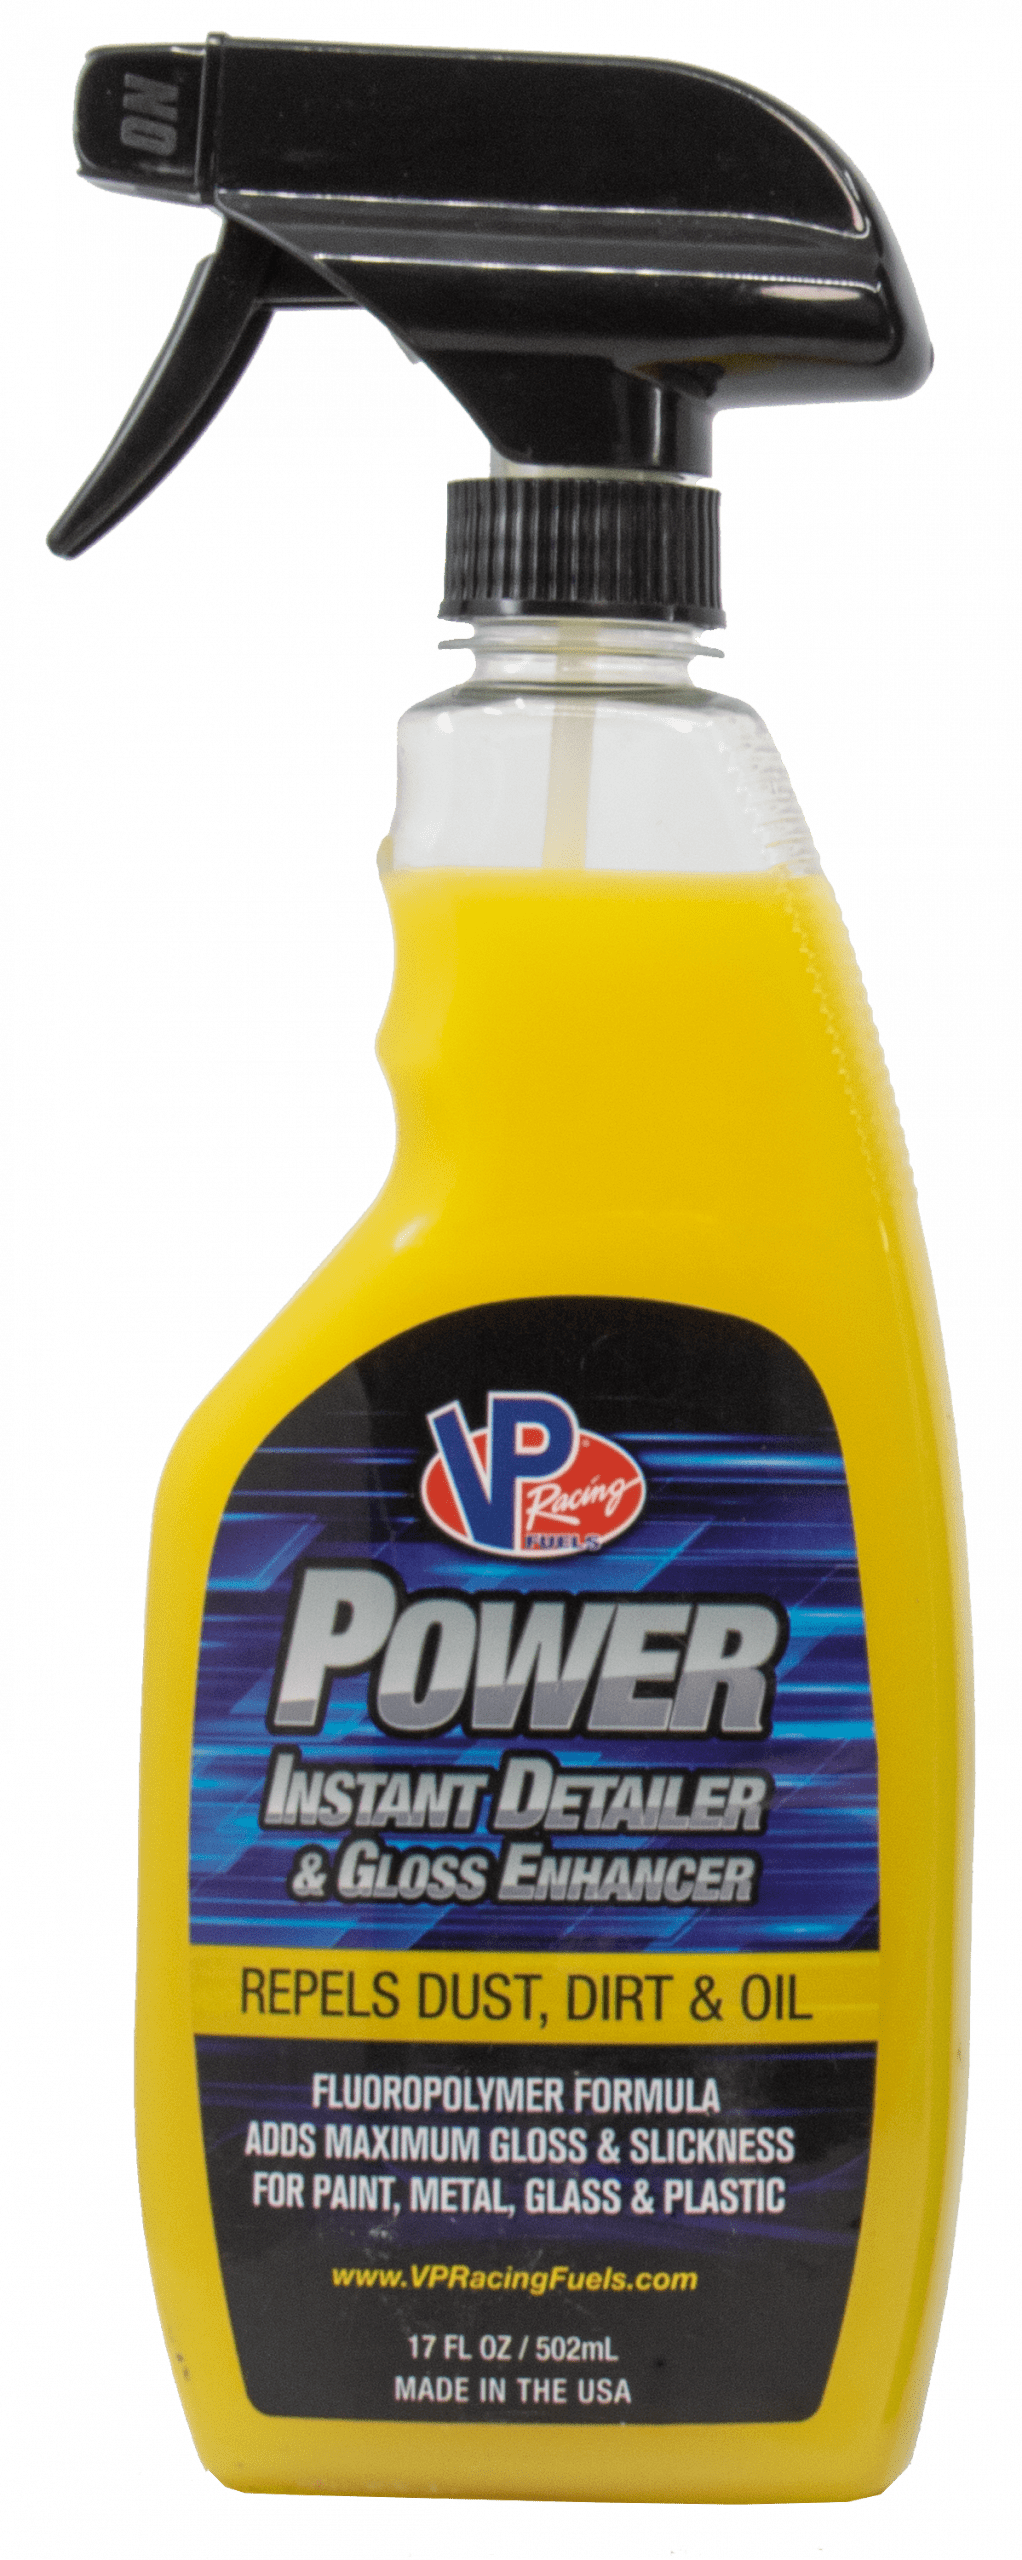 NEW Max Power Multi-Purpose Cleaners